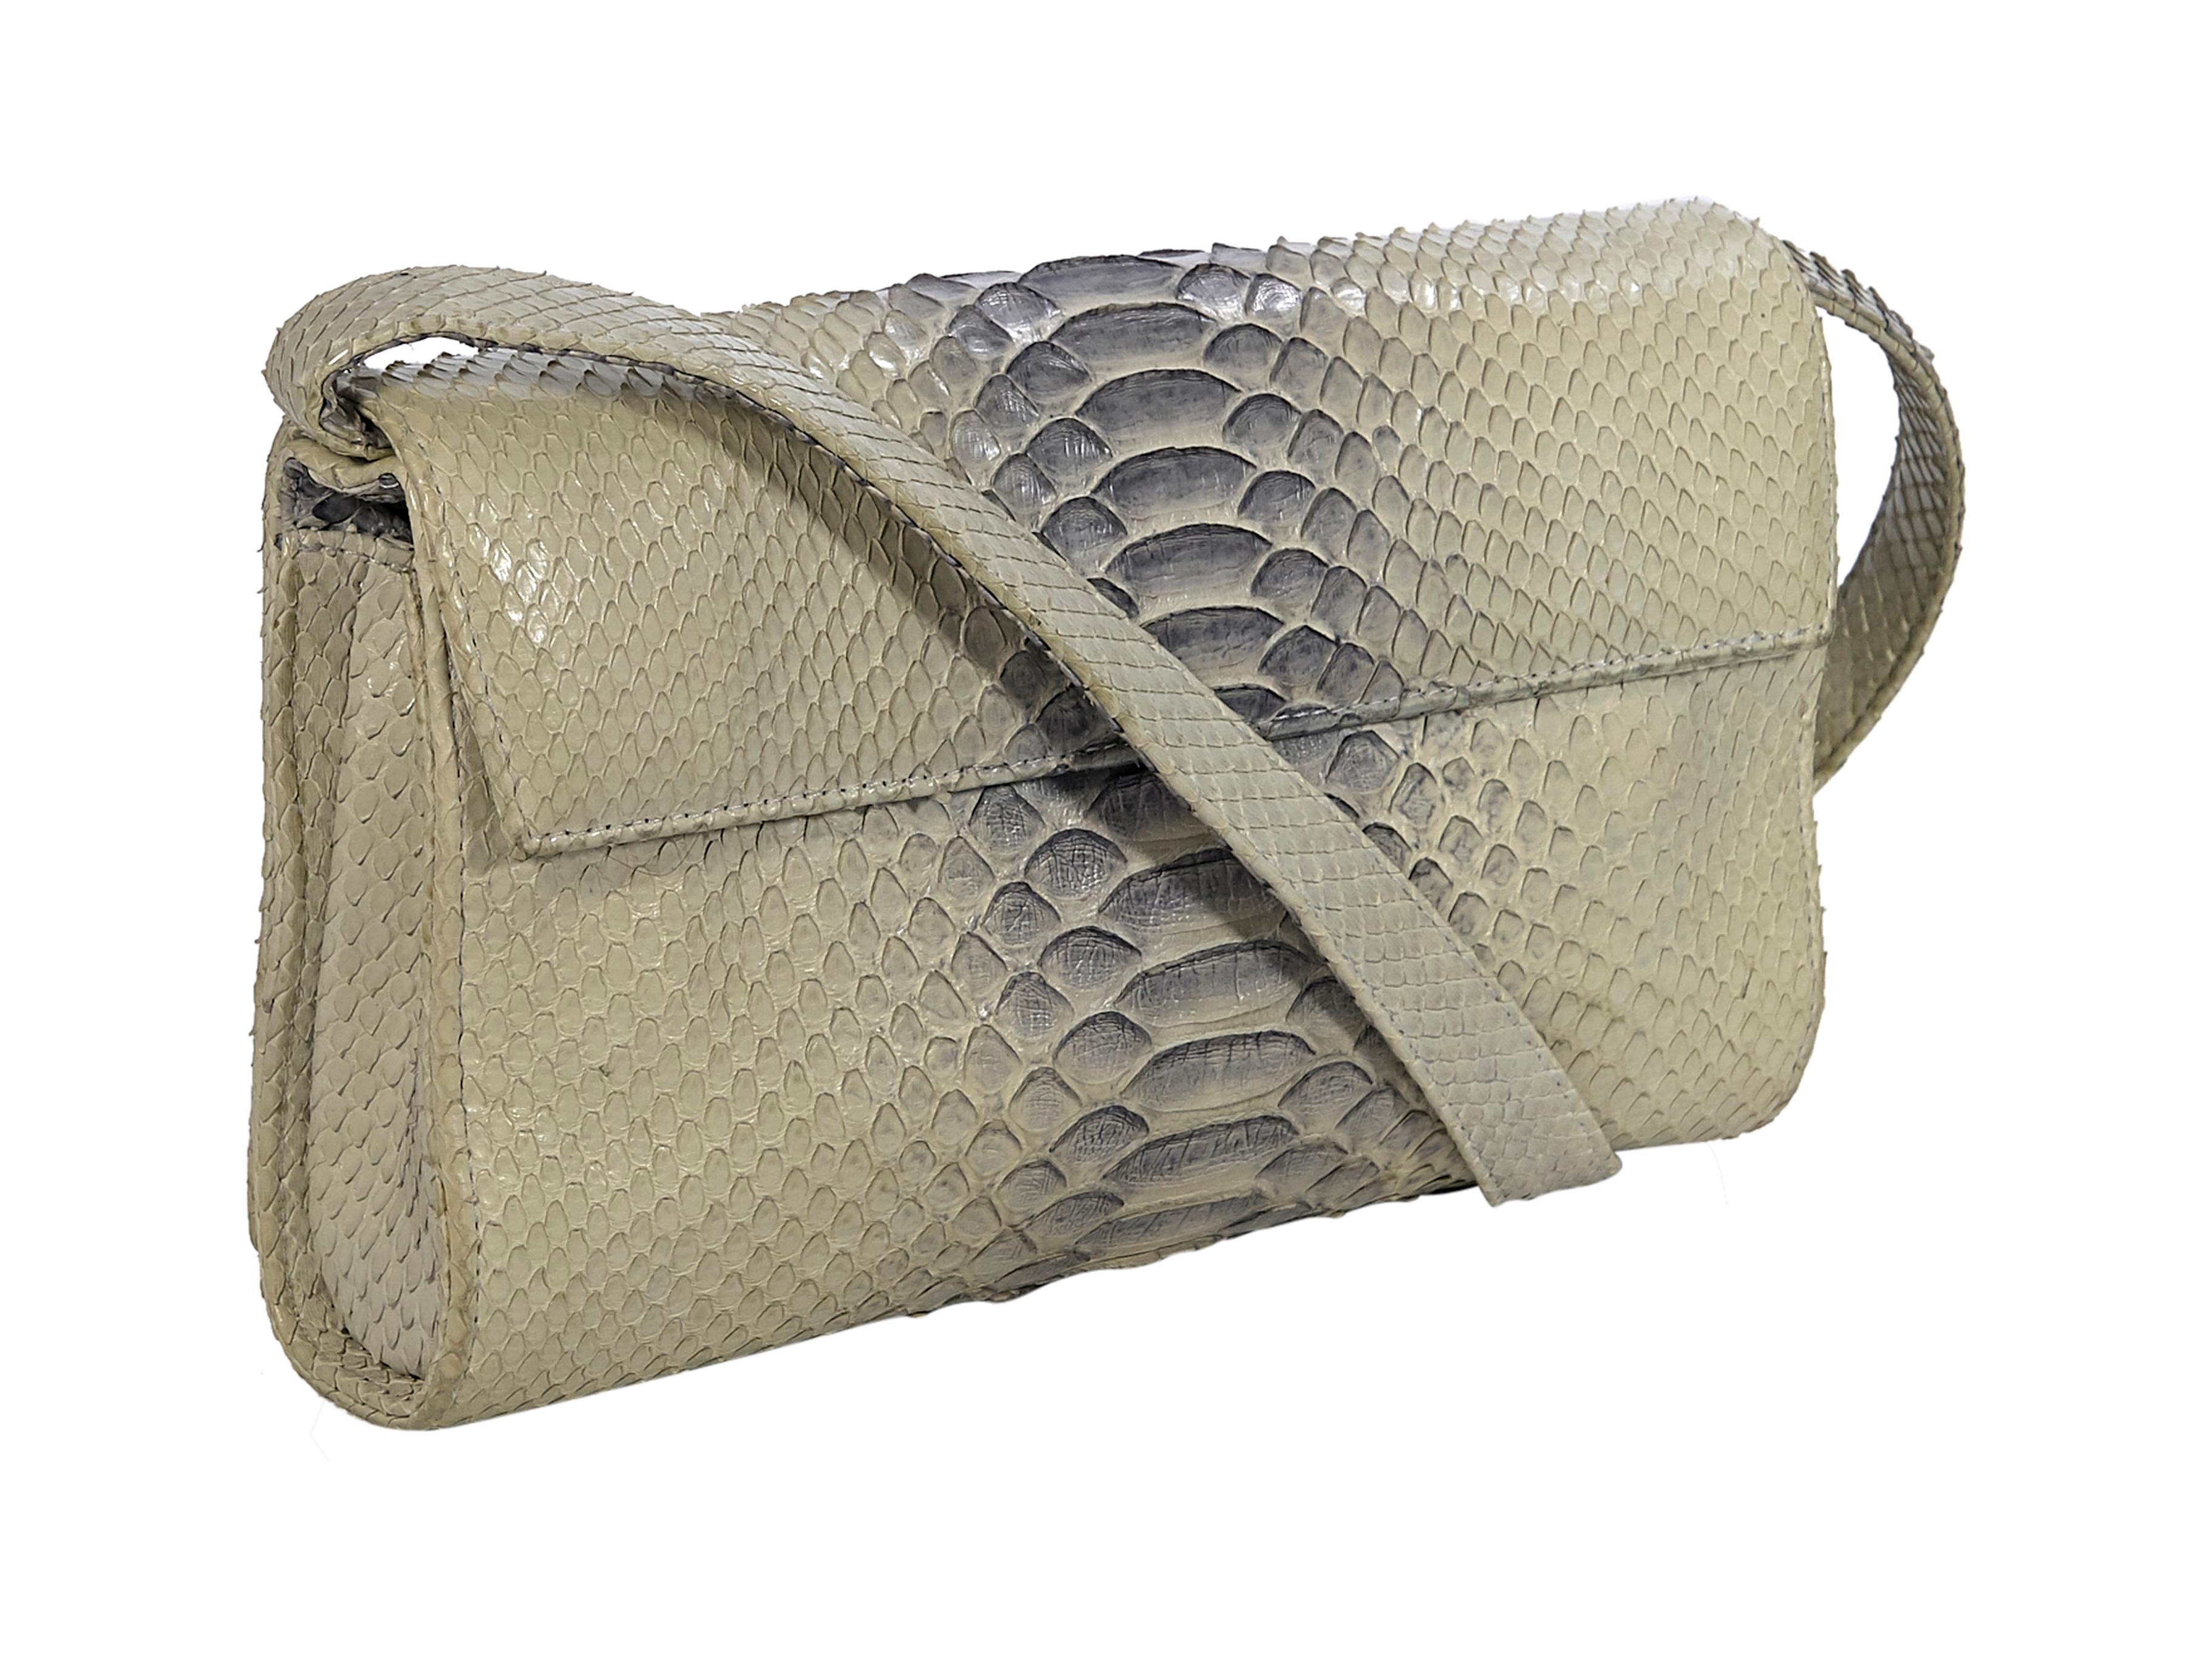 Product details: Cream leather snakeskin shoulder bag by Hayward. Adjustable shoulder strap.  Front flap with concealed magnetic snap closure. Lined interior with slide pocket. Silver-tone hardware. Wear crossbody with a linen midi skirt. 9